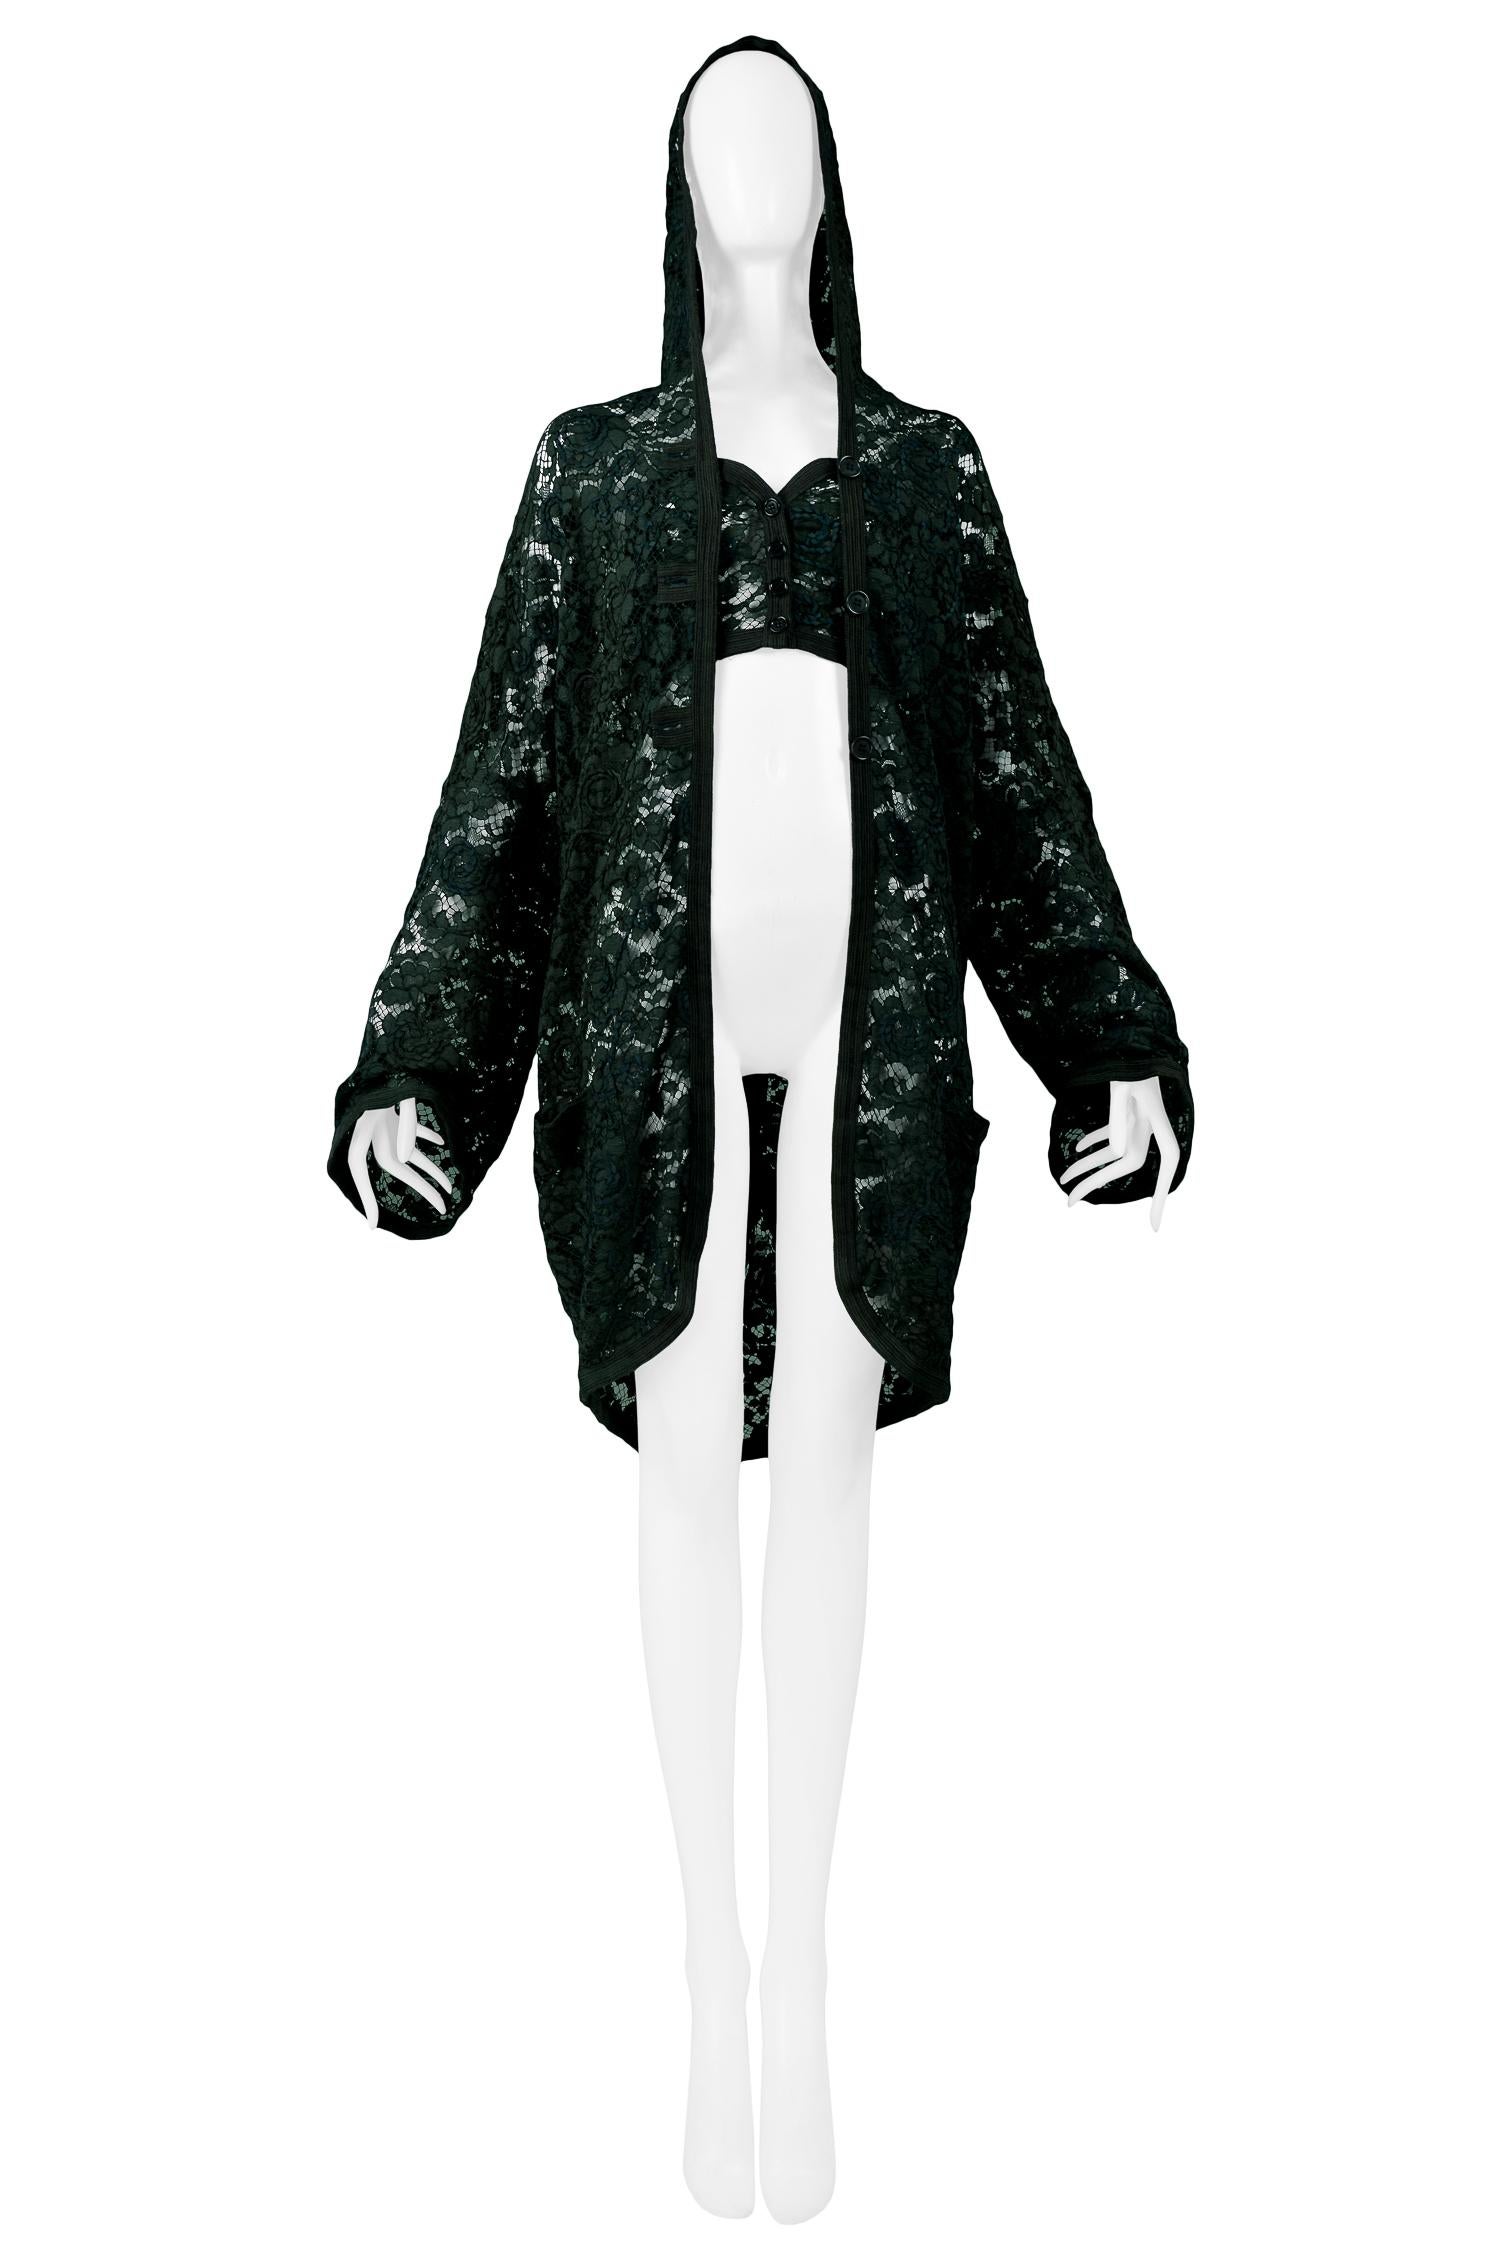 Resurrection Vintage is excited to offer a vintage Romeo Gigli green floral lace hooded jacket. The jacket features a lace hood, oversized body, side pockets, matching trim, and center button closure. Pictured with a matching green lace cropped